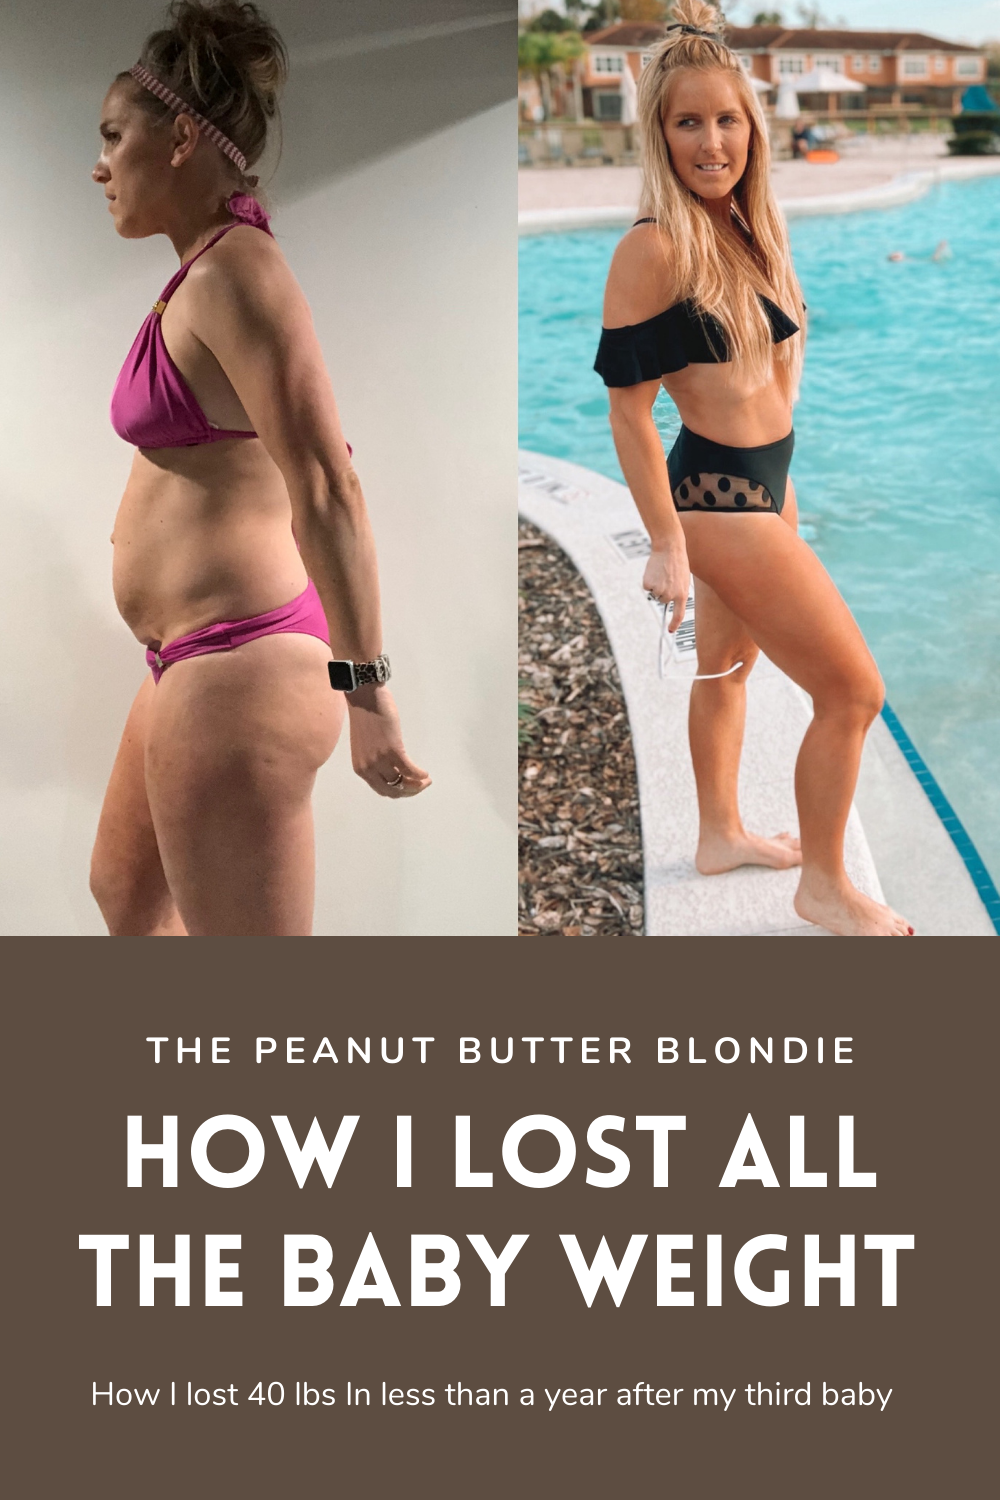 Flat Tummy App Review: My PostPartum Weight Loss Journey